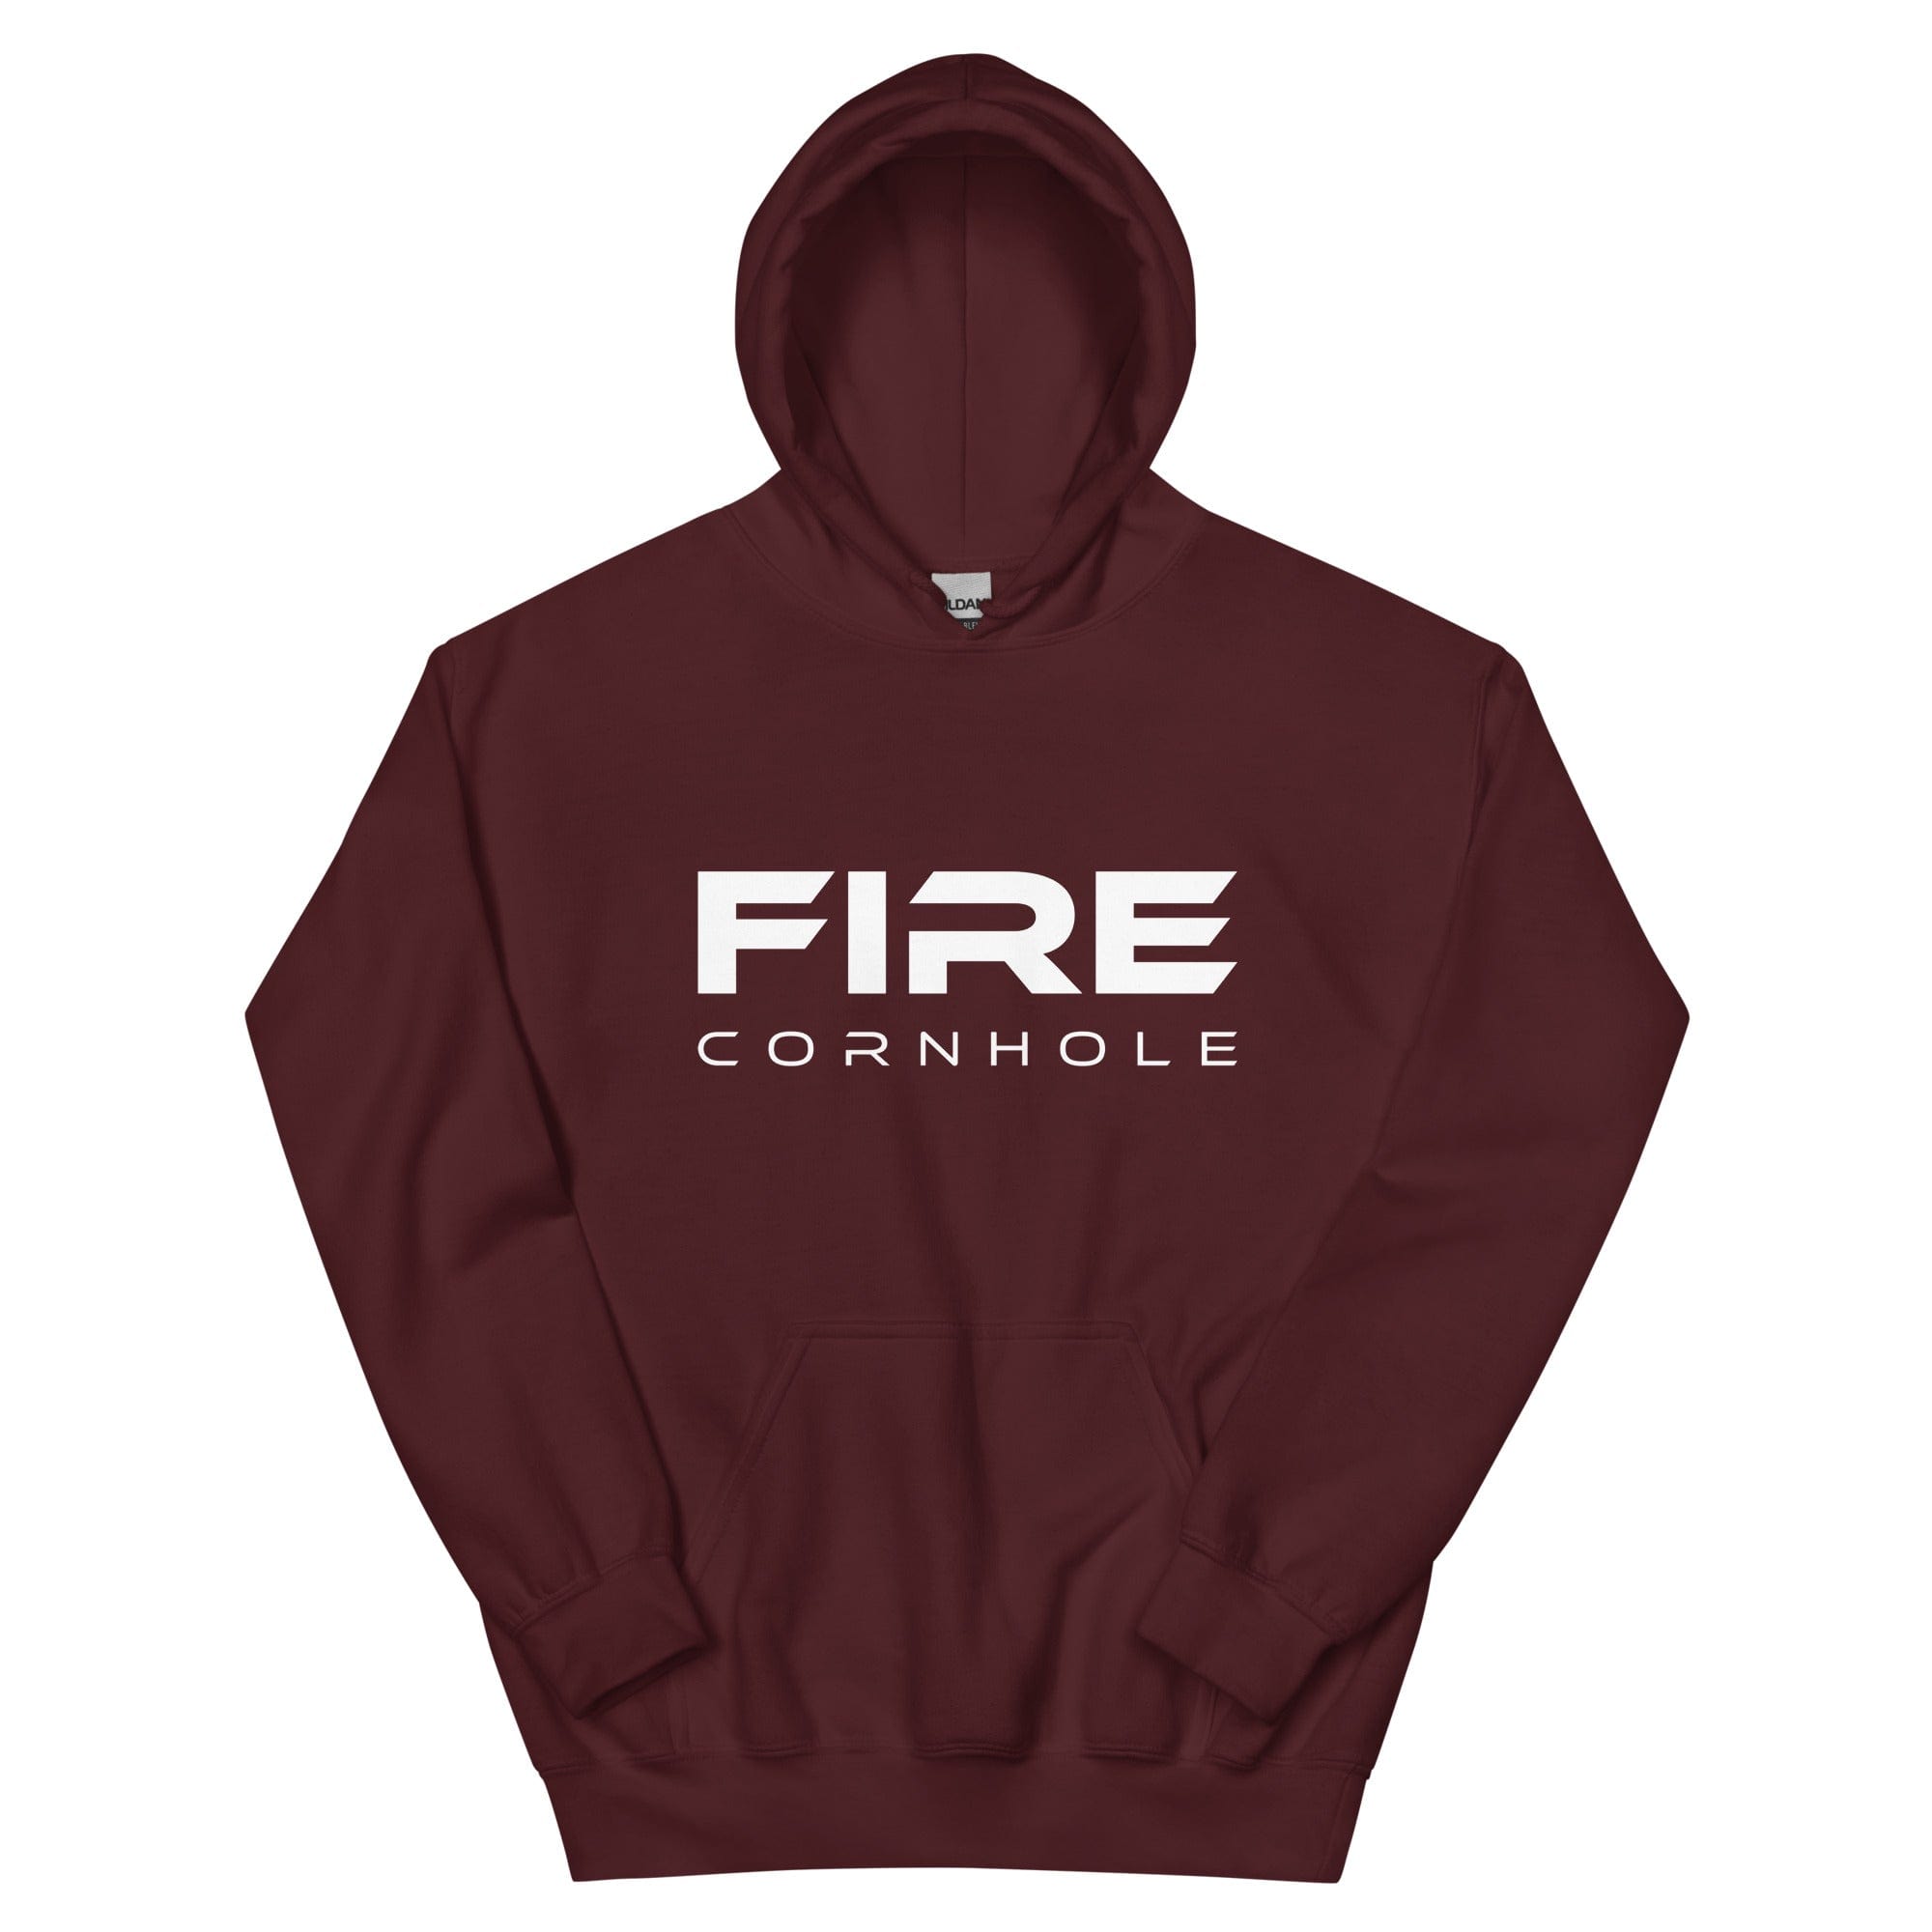 Maroon unisex cotton hoodie with Fire Cornhole logo in white